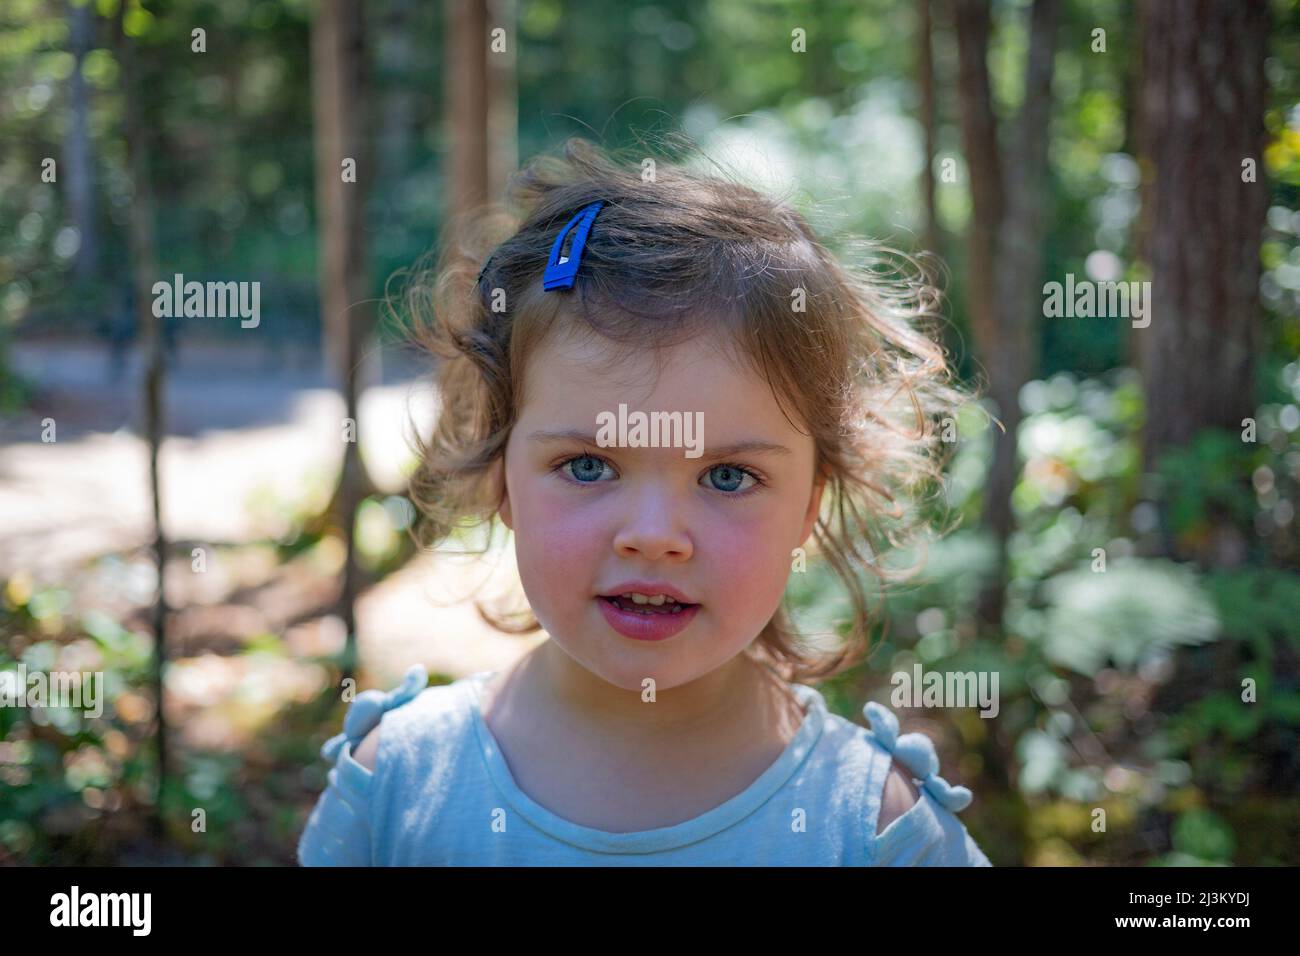 Close-up outdoor portrait of a preschooler girl with blue eyes, blond curls and rosy cheeks; British Columbia, Canada Stock Photo